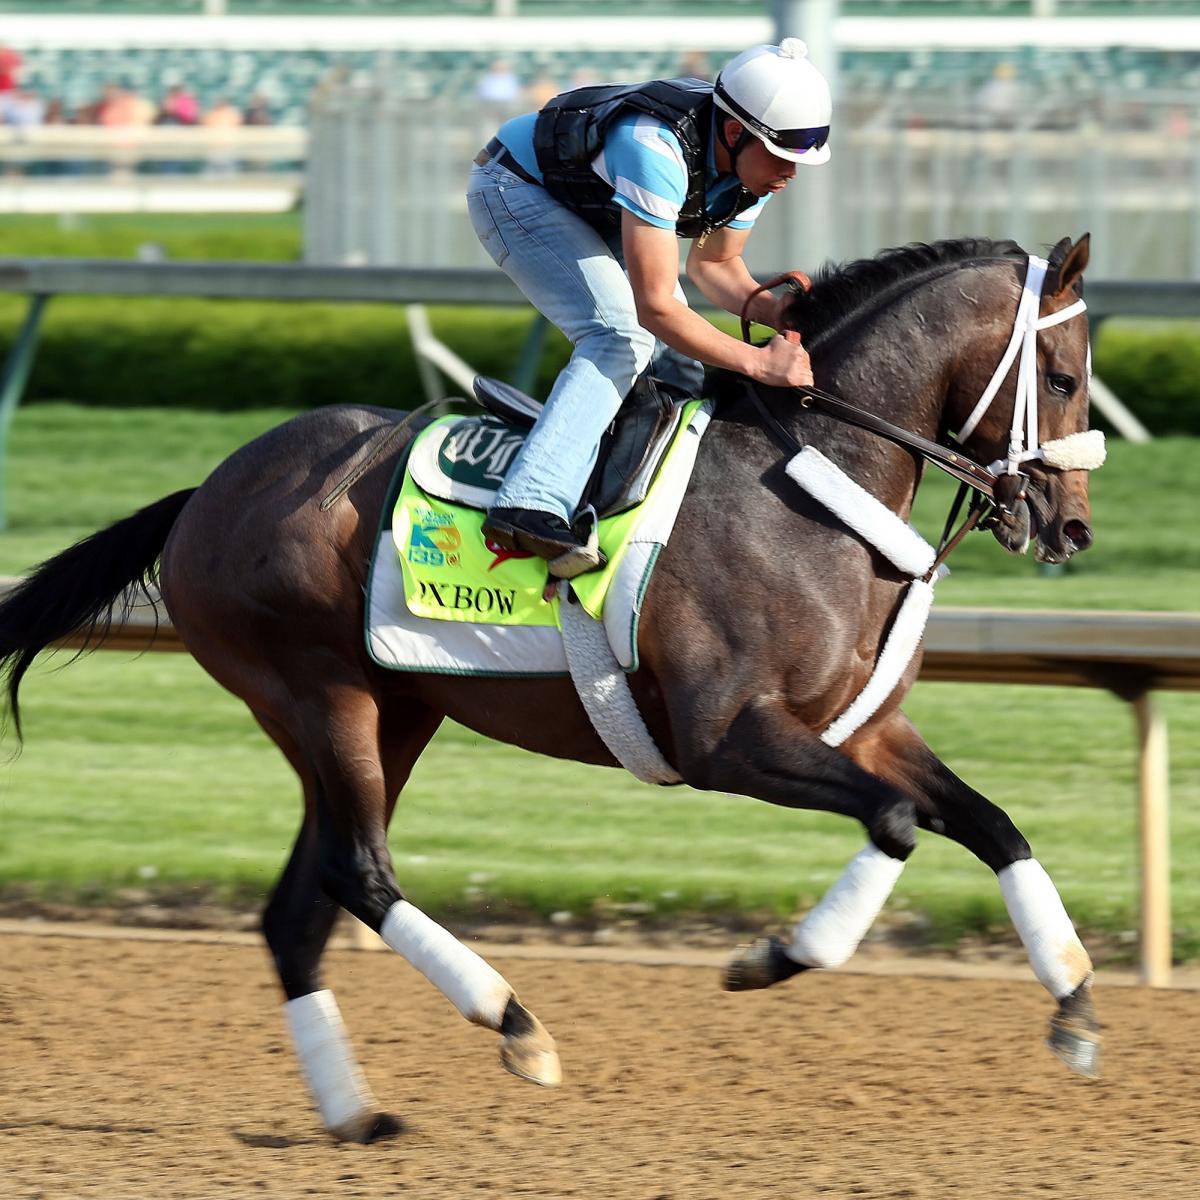 Preakness Picks Underdogs That Will Have Strong Showings at Pimlico